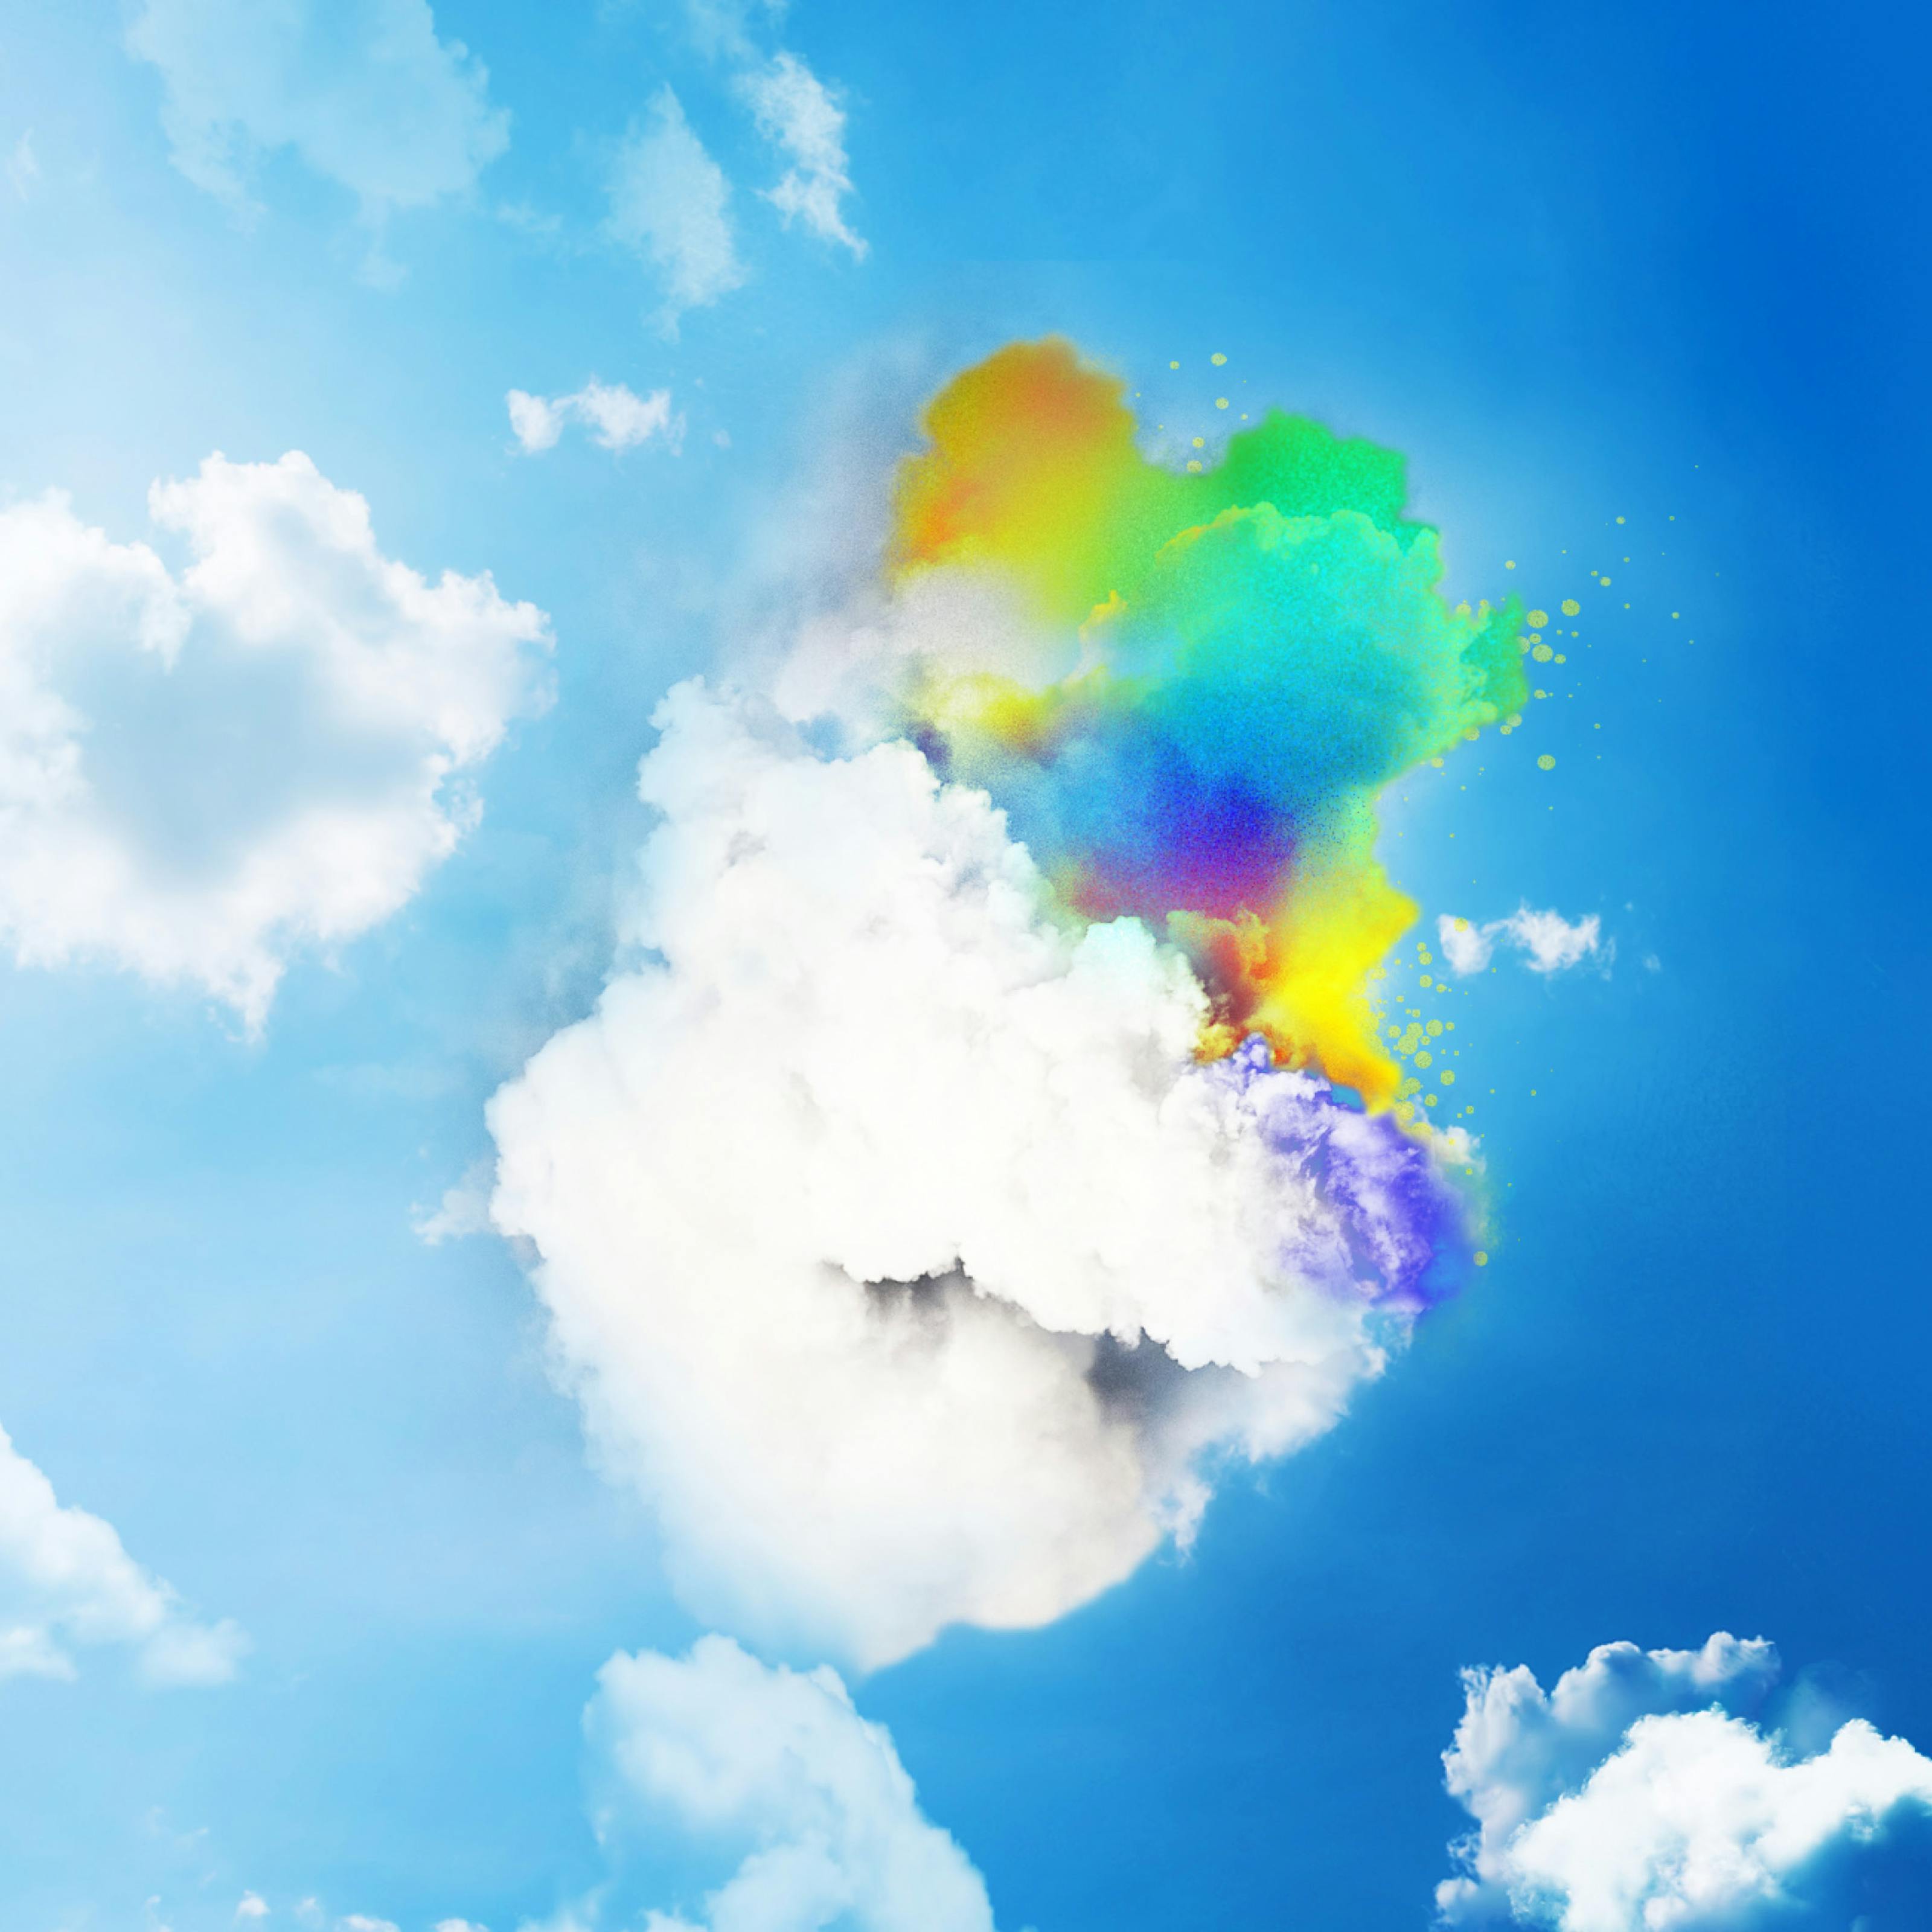 Digitally created colour image showing a bright blue sky which graduates from light blue on the left to dark blue on the right. The sky is peppered with fluffy white cloud formations. One cloud is prominently central in the frame and the top section of it has been tinted with all the colours of the rainbow, greens, reds, violets, oranges, yellows. 